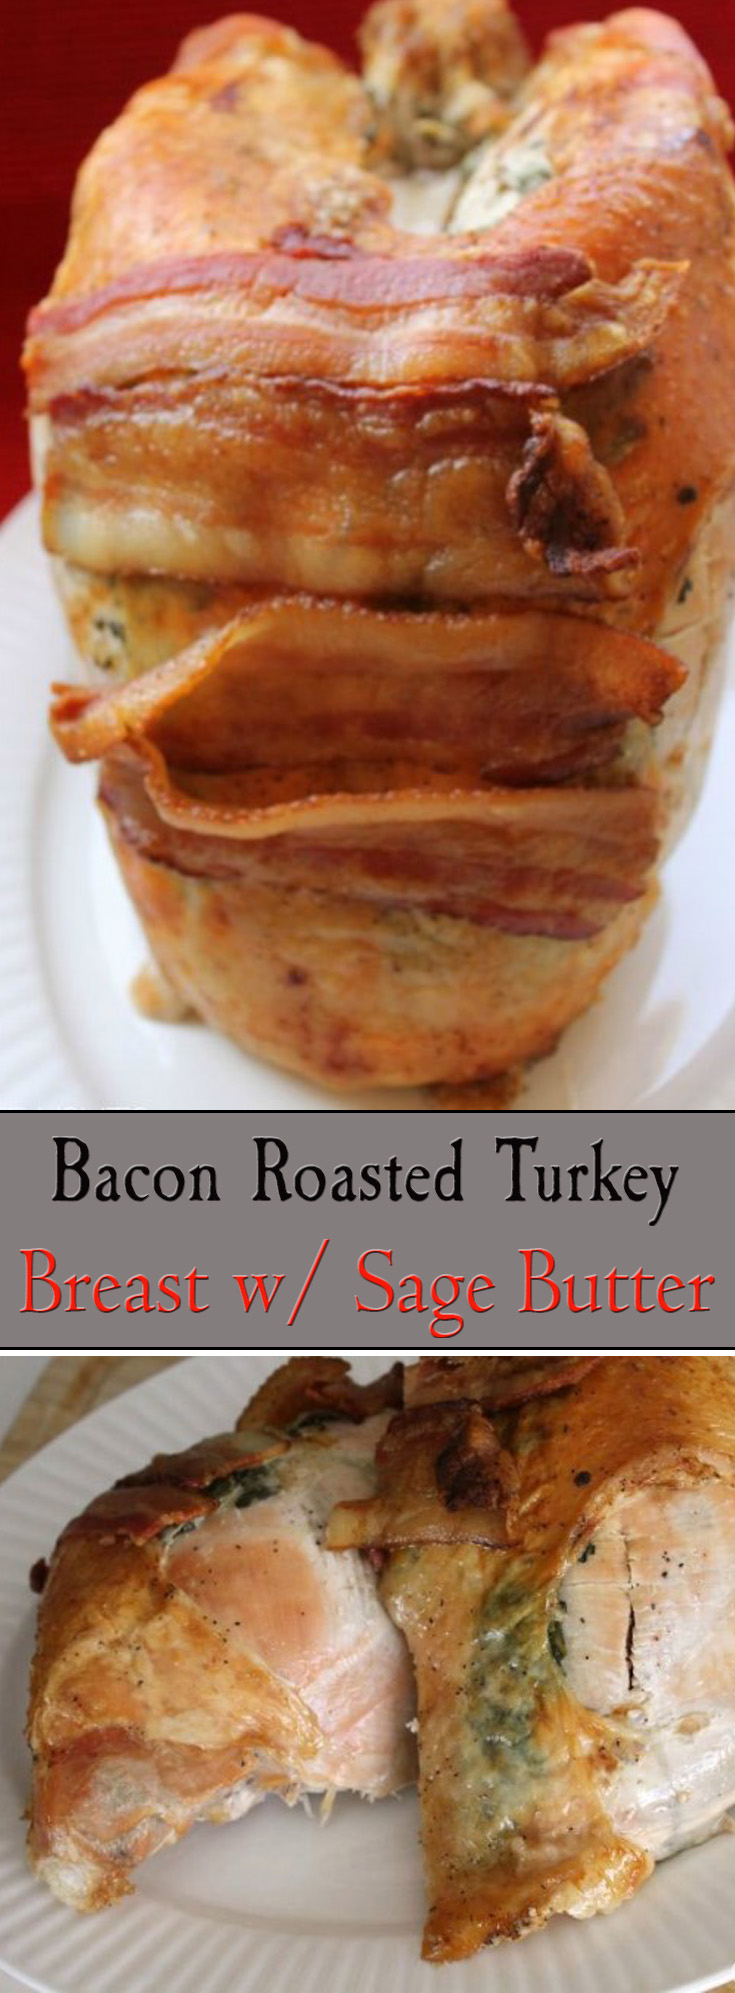 Bacon Roasted Turkey Breast with Sage Butter